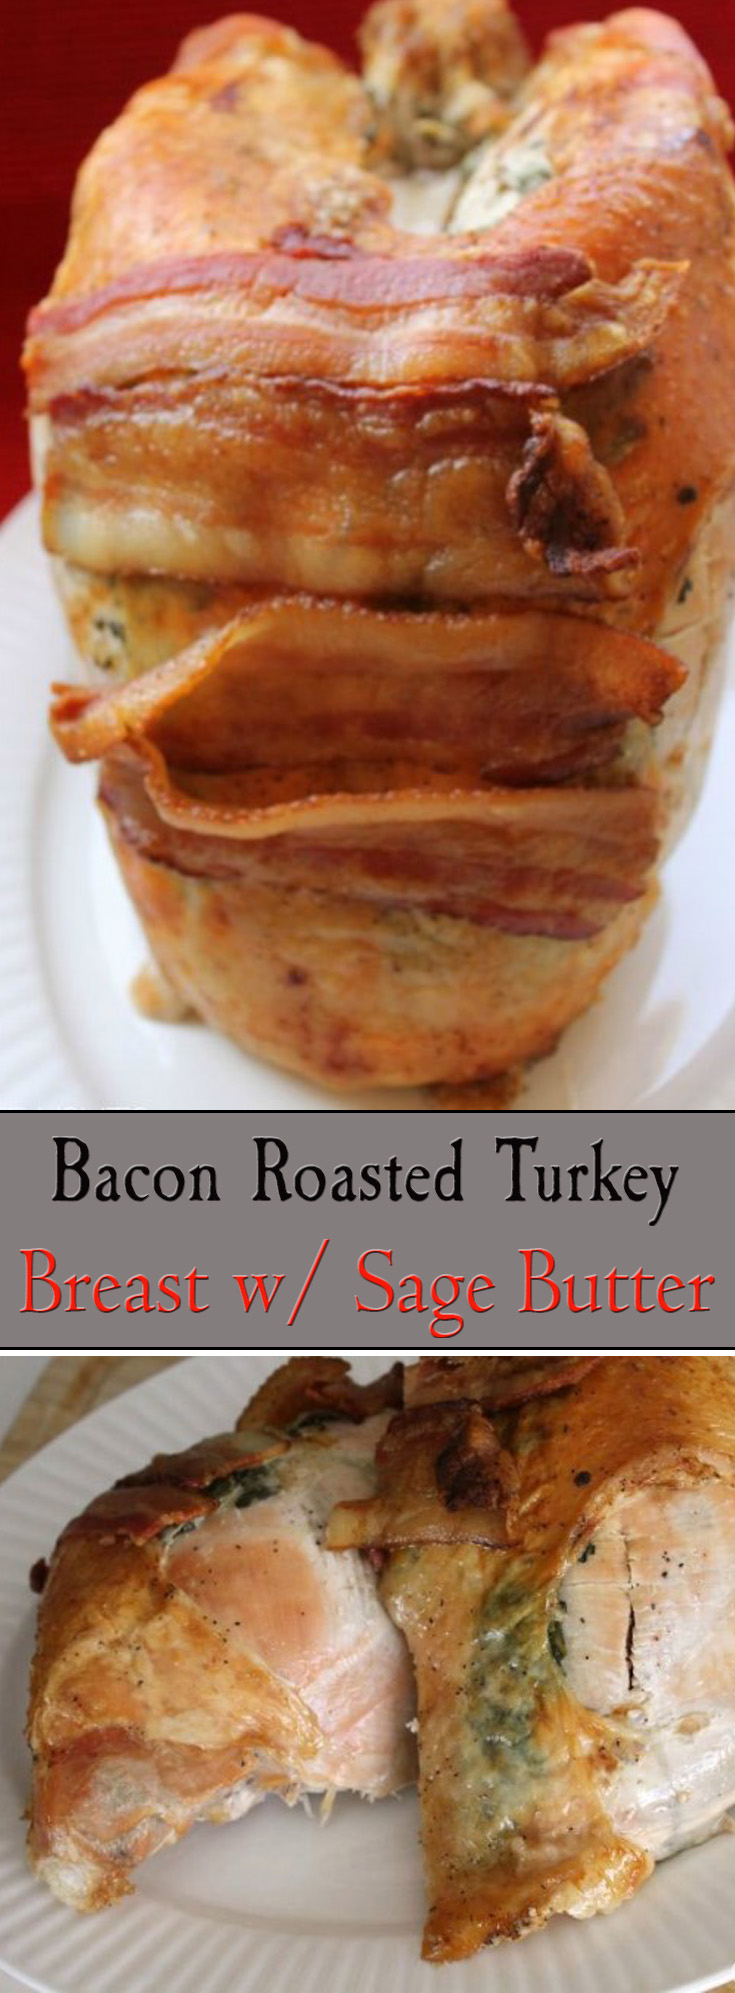 Bacon Roasted Turkey Breast with Sage Butter